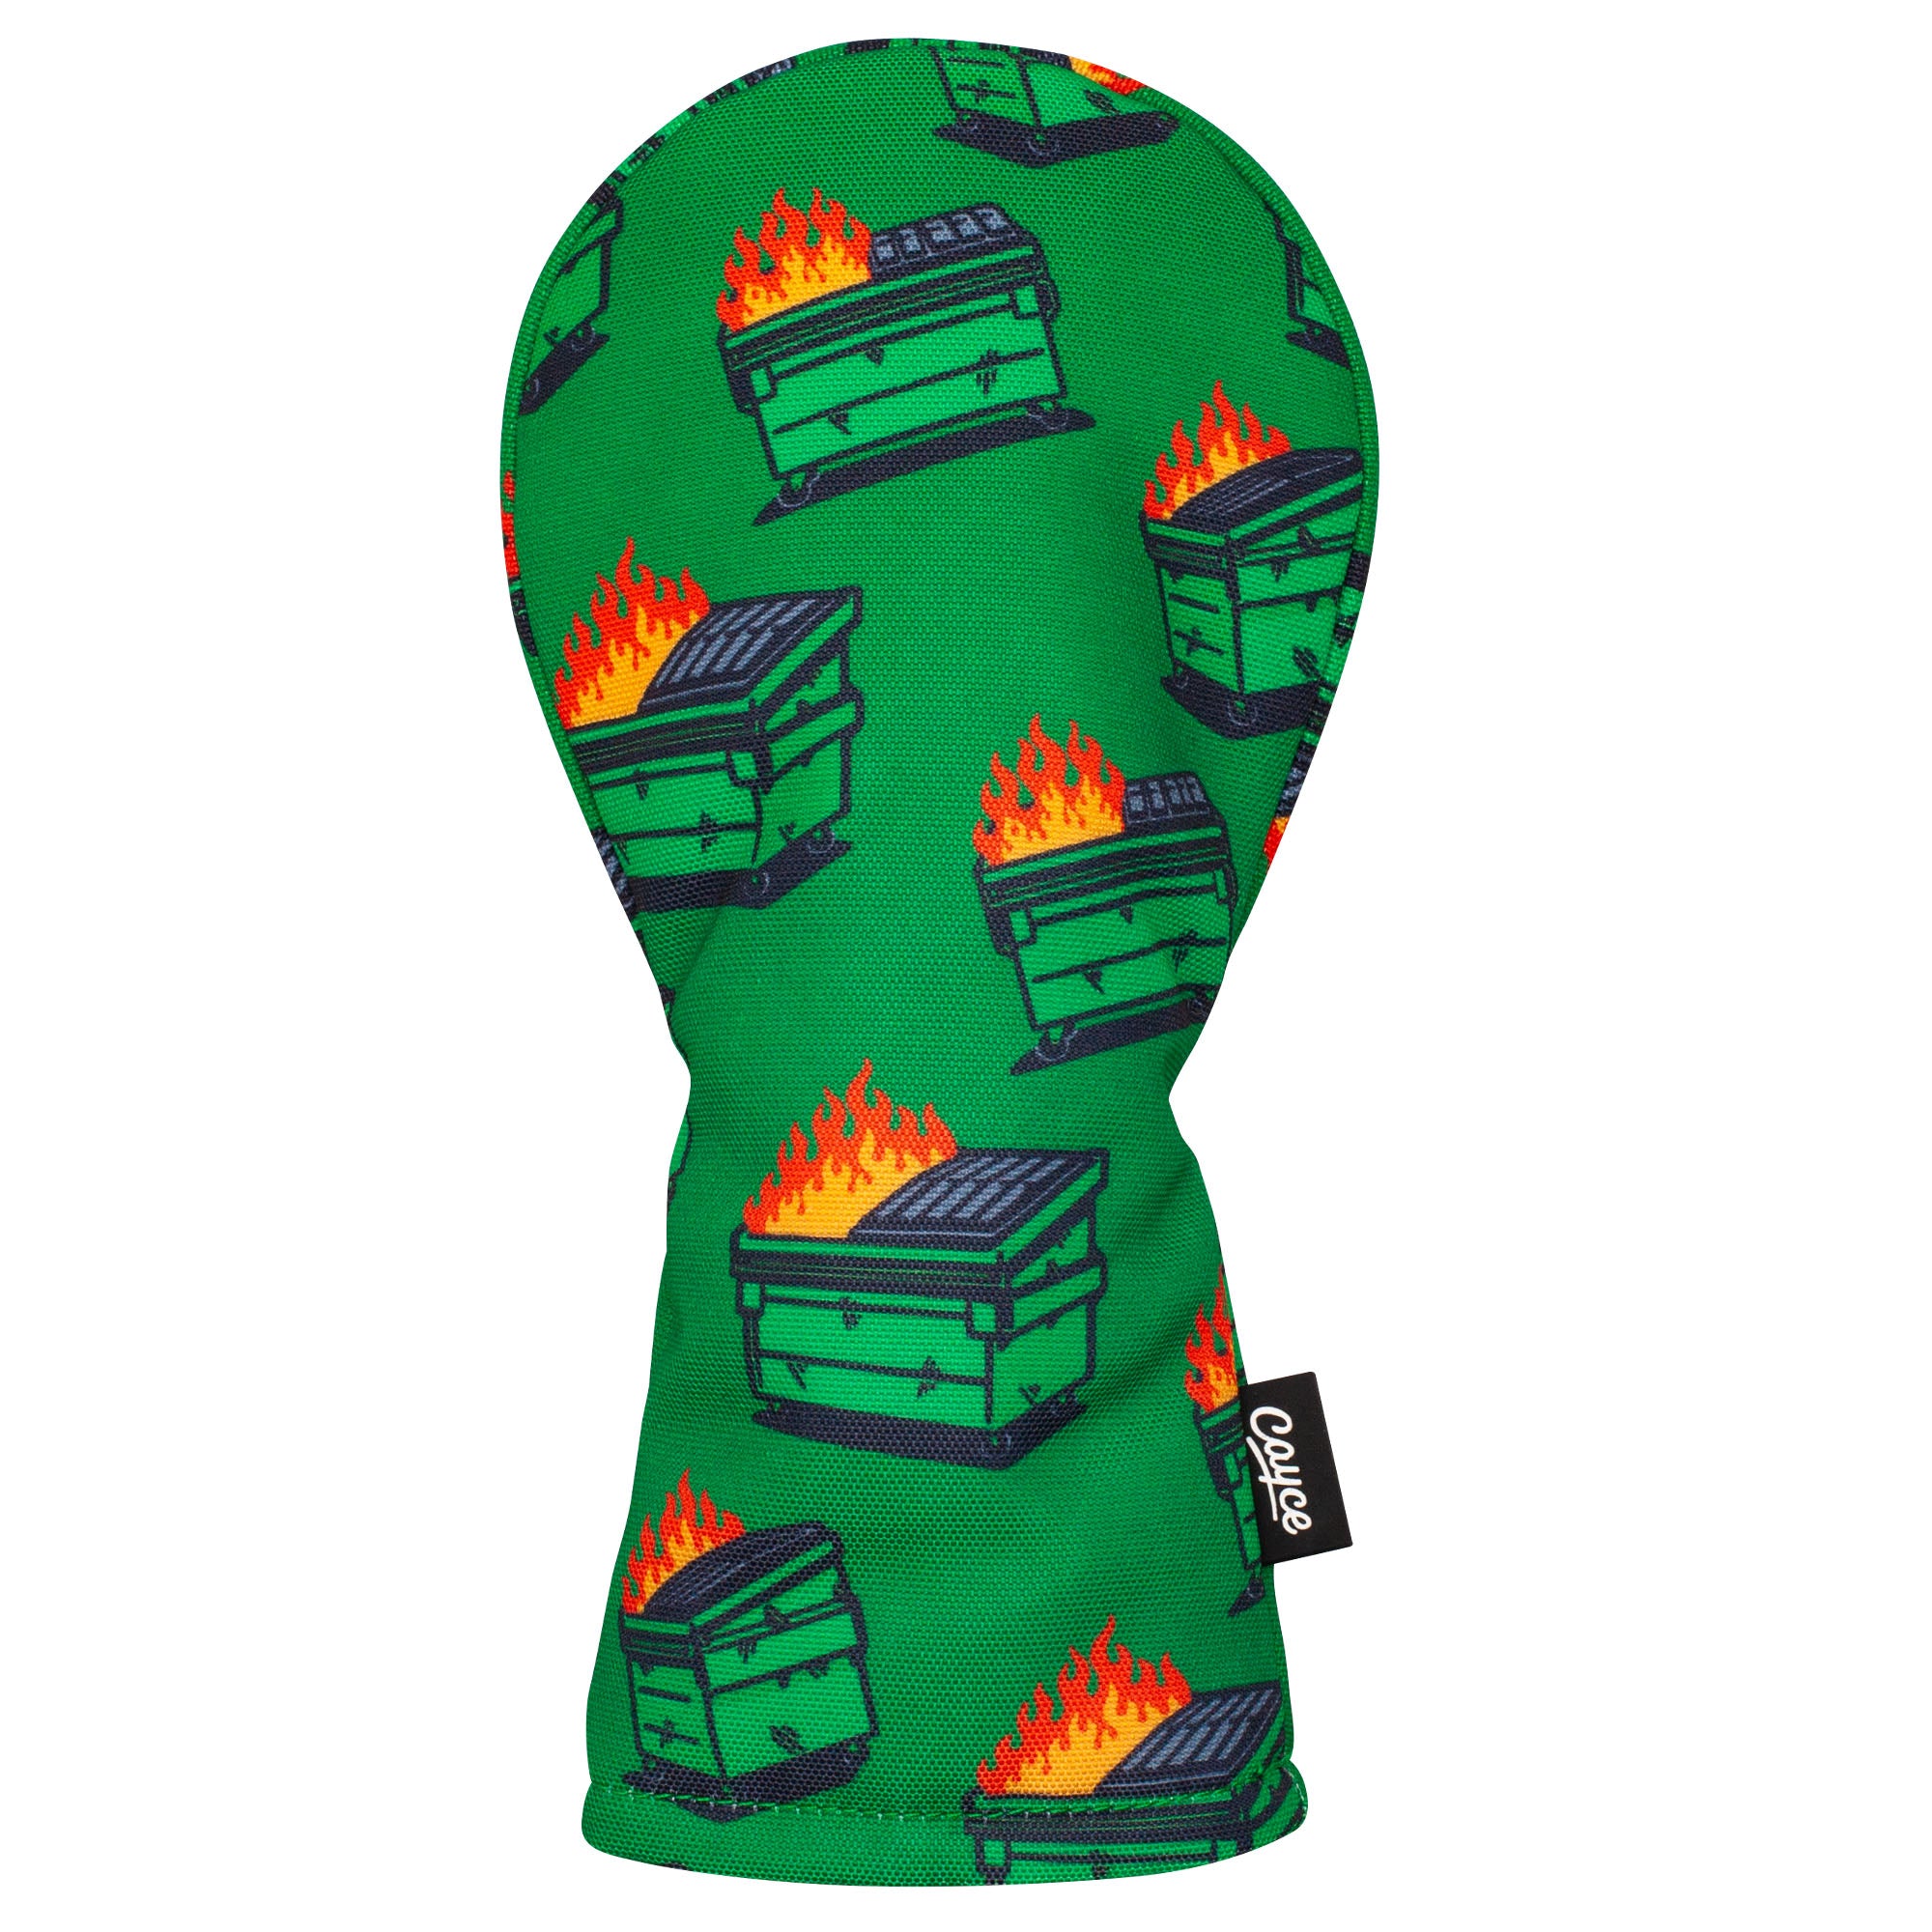 green, hourglass shaped hybrid headcover from Cayce with a dancing dumpster fire pattern on a white background